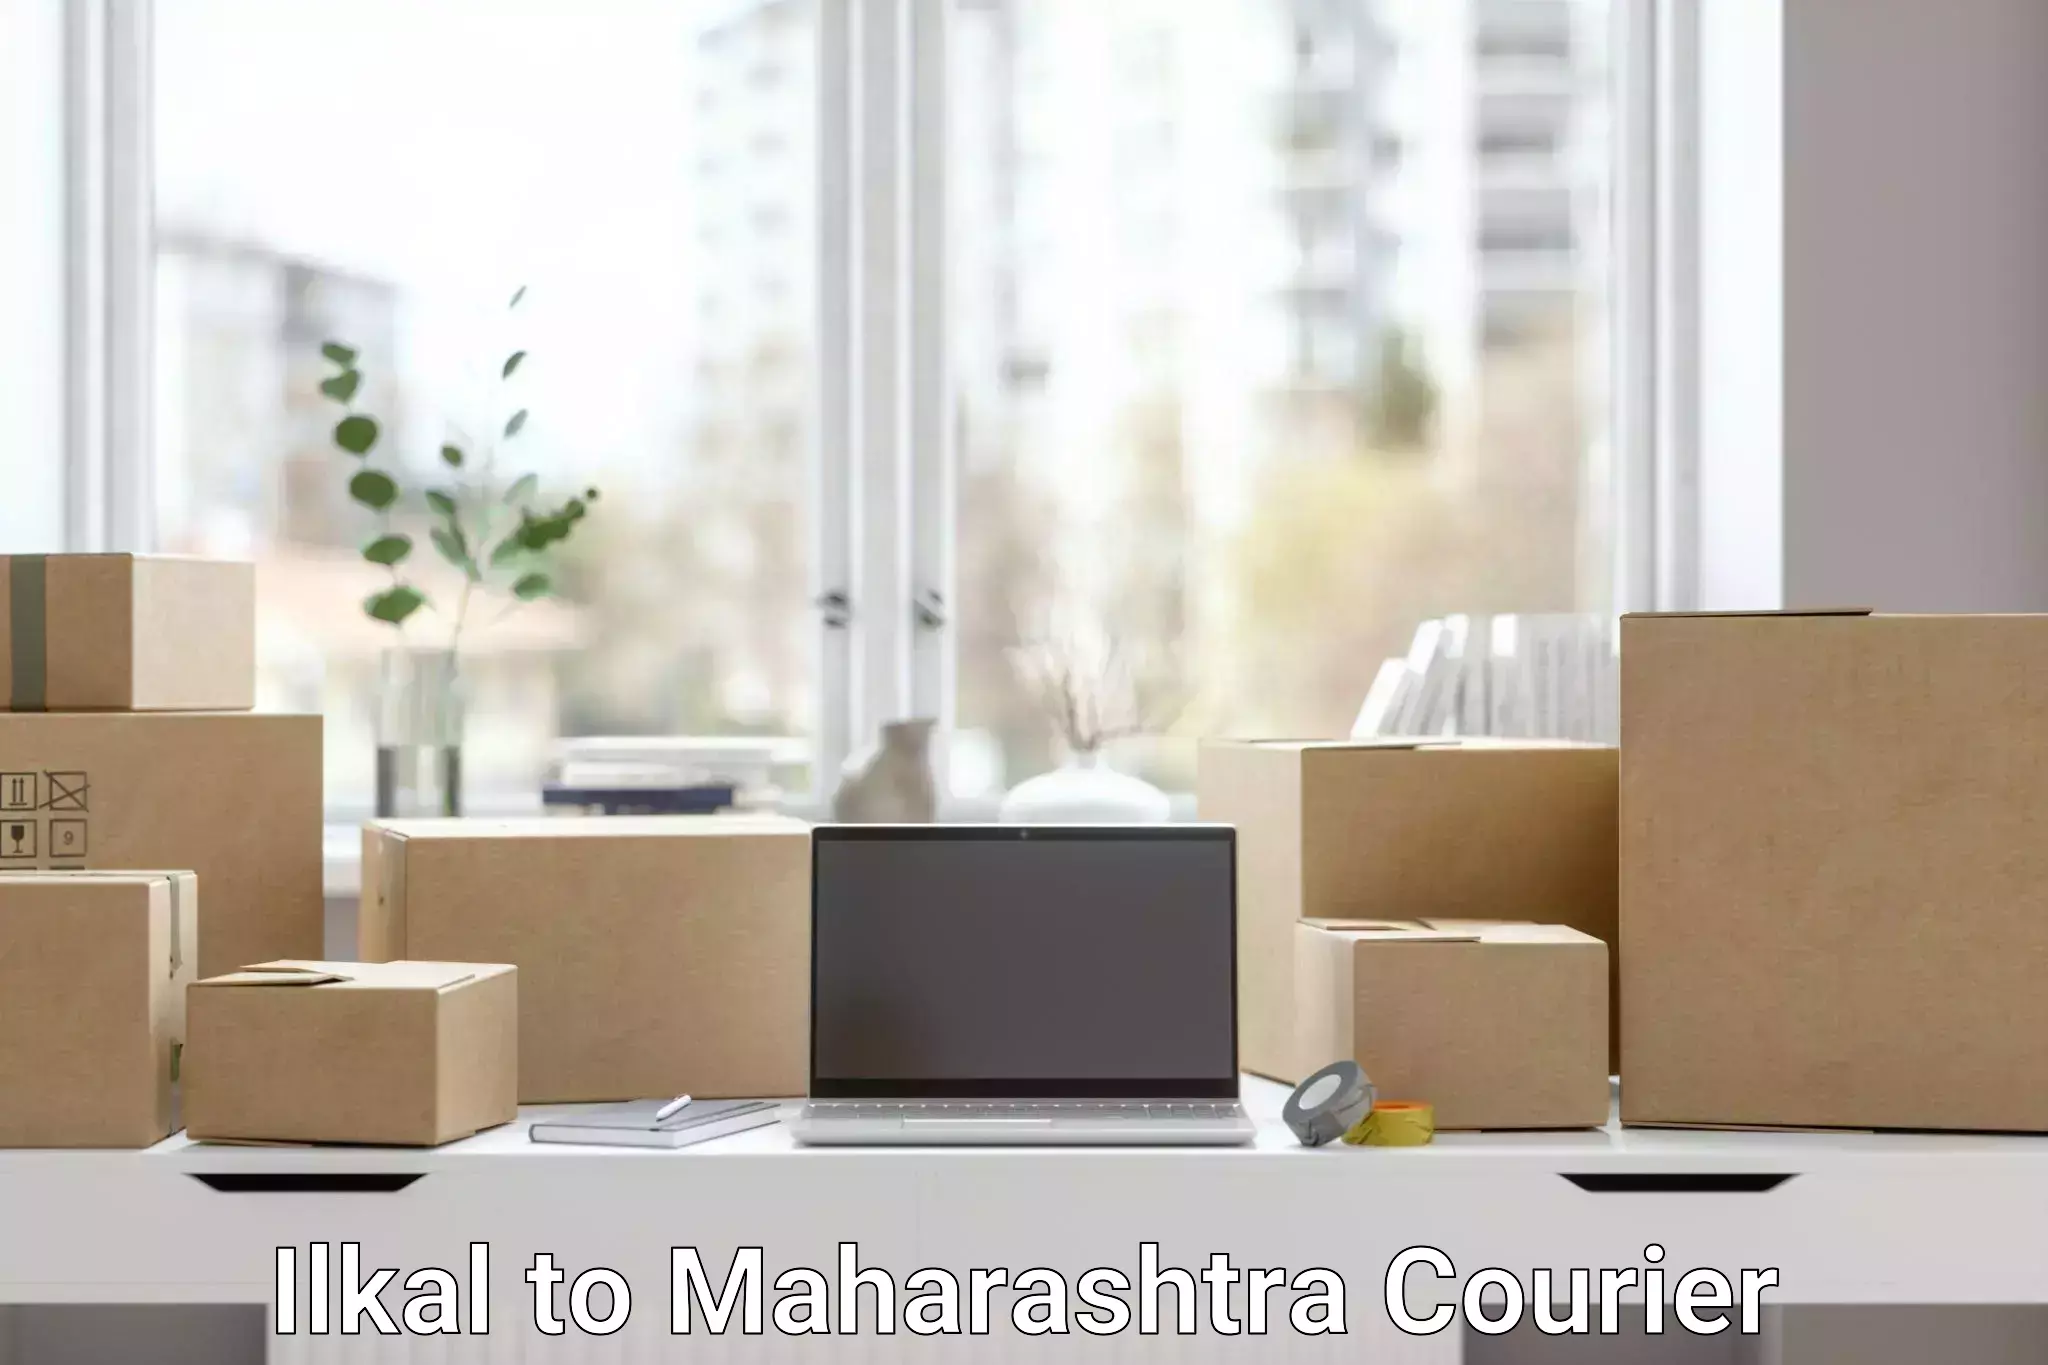 Online shipping calculator Ilkal to Jalna